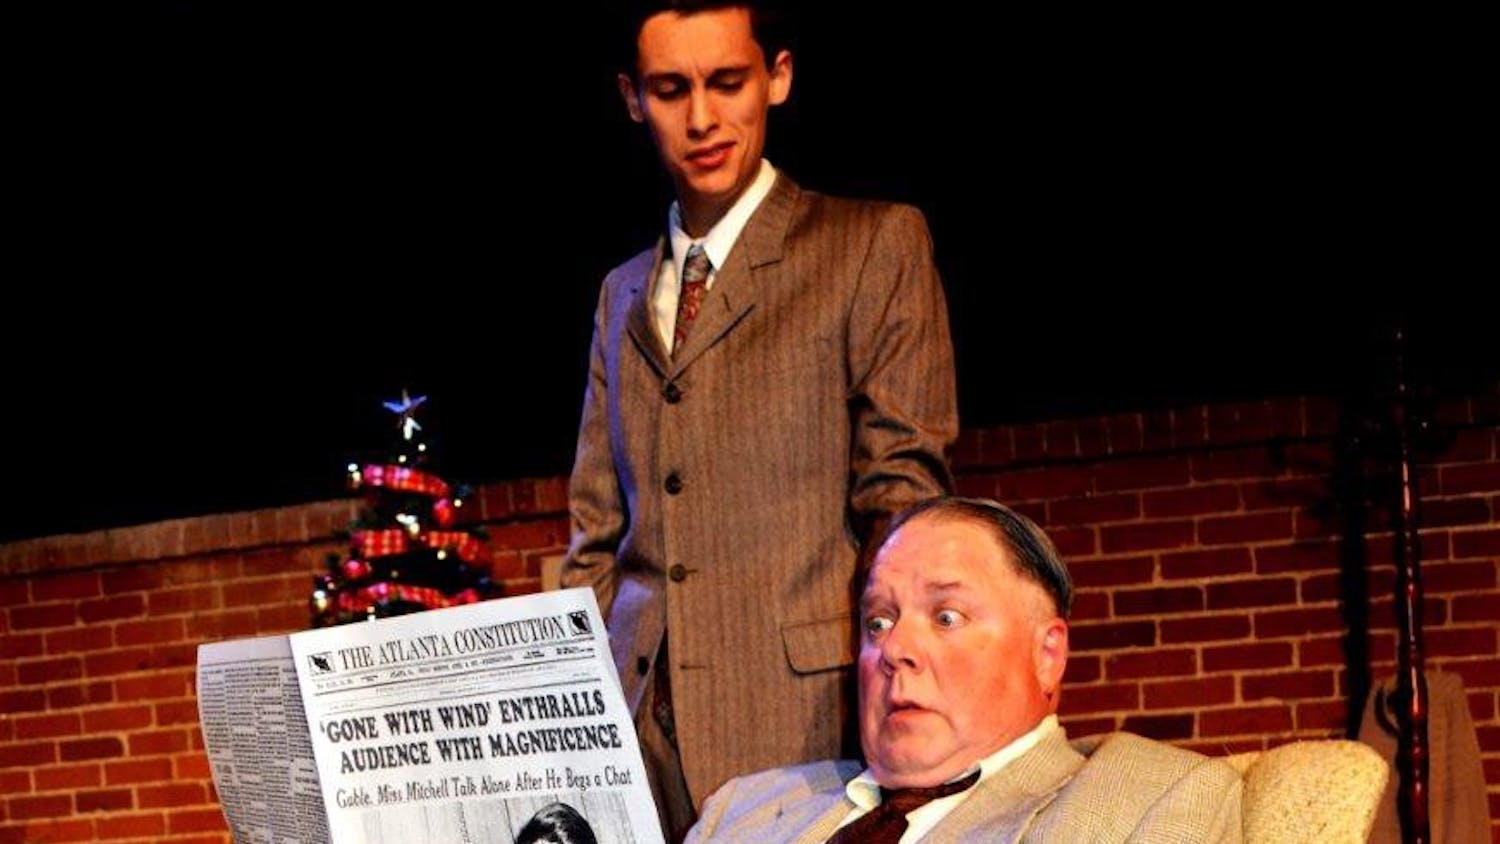 Felix Merback, as Joe Farkas, and Adam Crowe, as Adolph Freitag, react to news of Hitler's advance into Poland in the performance of "The Last Night of Ballyhoo." The show, put on by the Jewish Theatre of Bloomington, will show at 7:30 p.m. Dec.&nbsp;2, 7 and 9 and at 3 p.m. on Dec. 3 and 10.